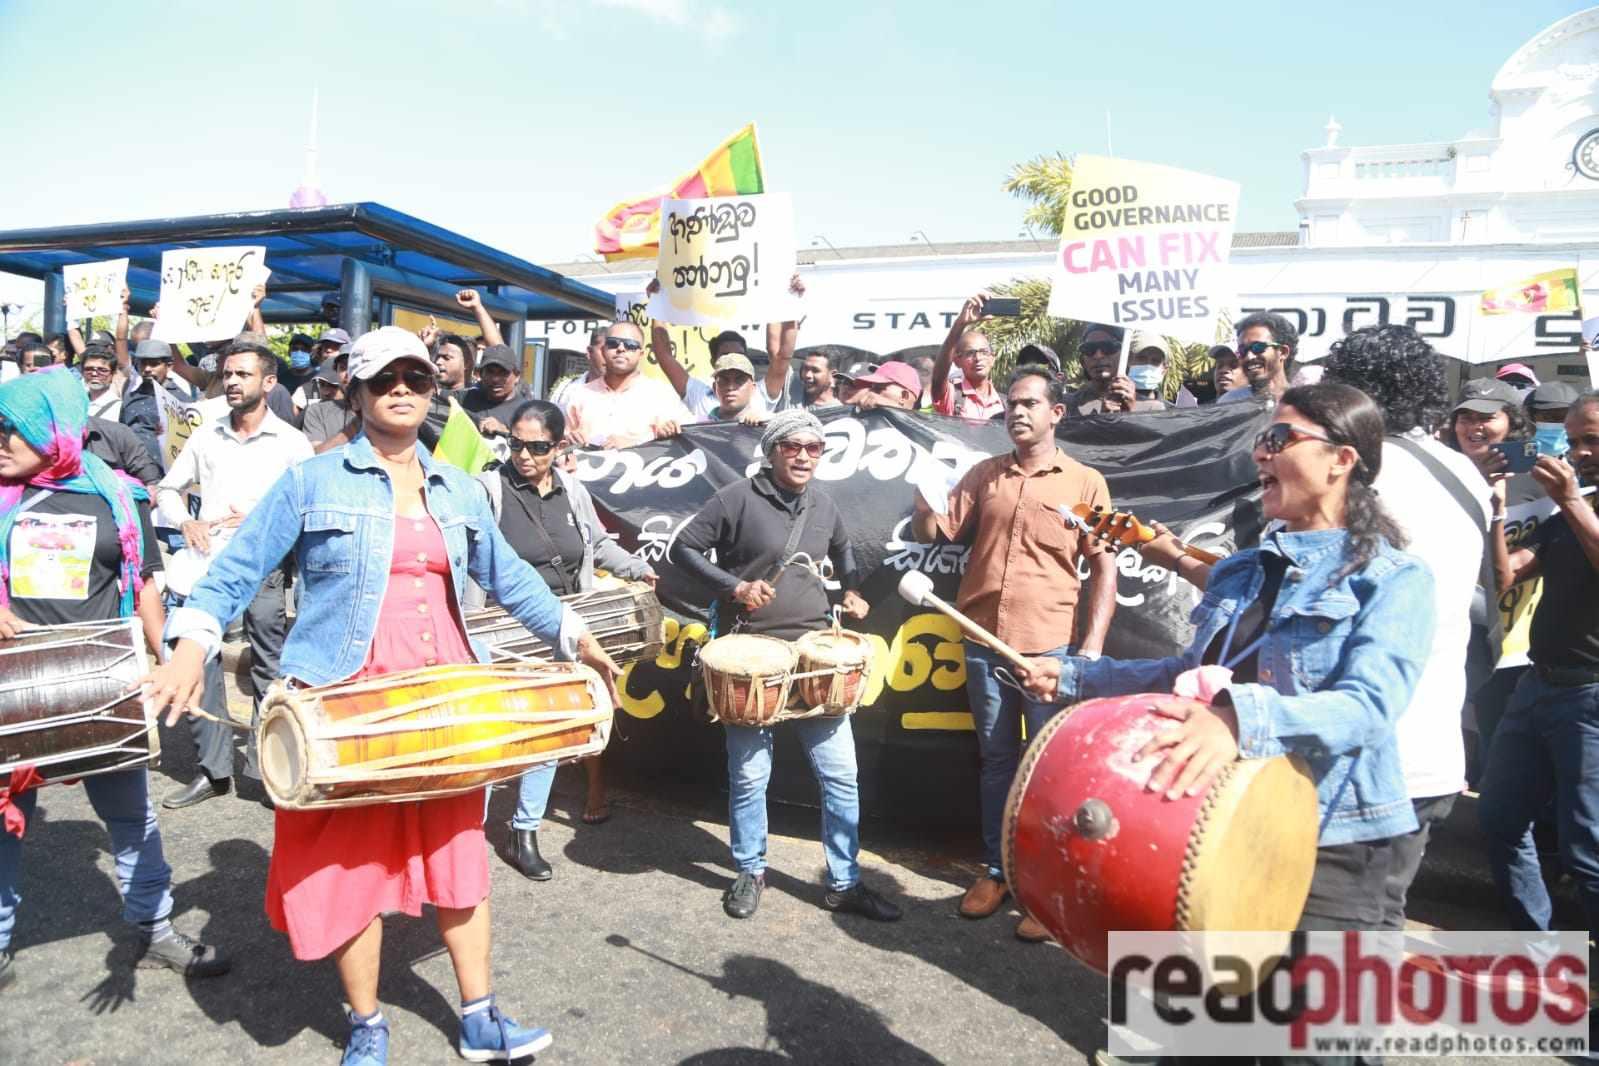 Protest held at Colombo Fort demanding the release of GGG activists